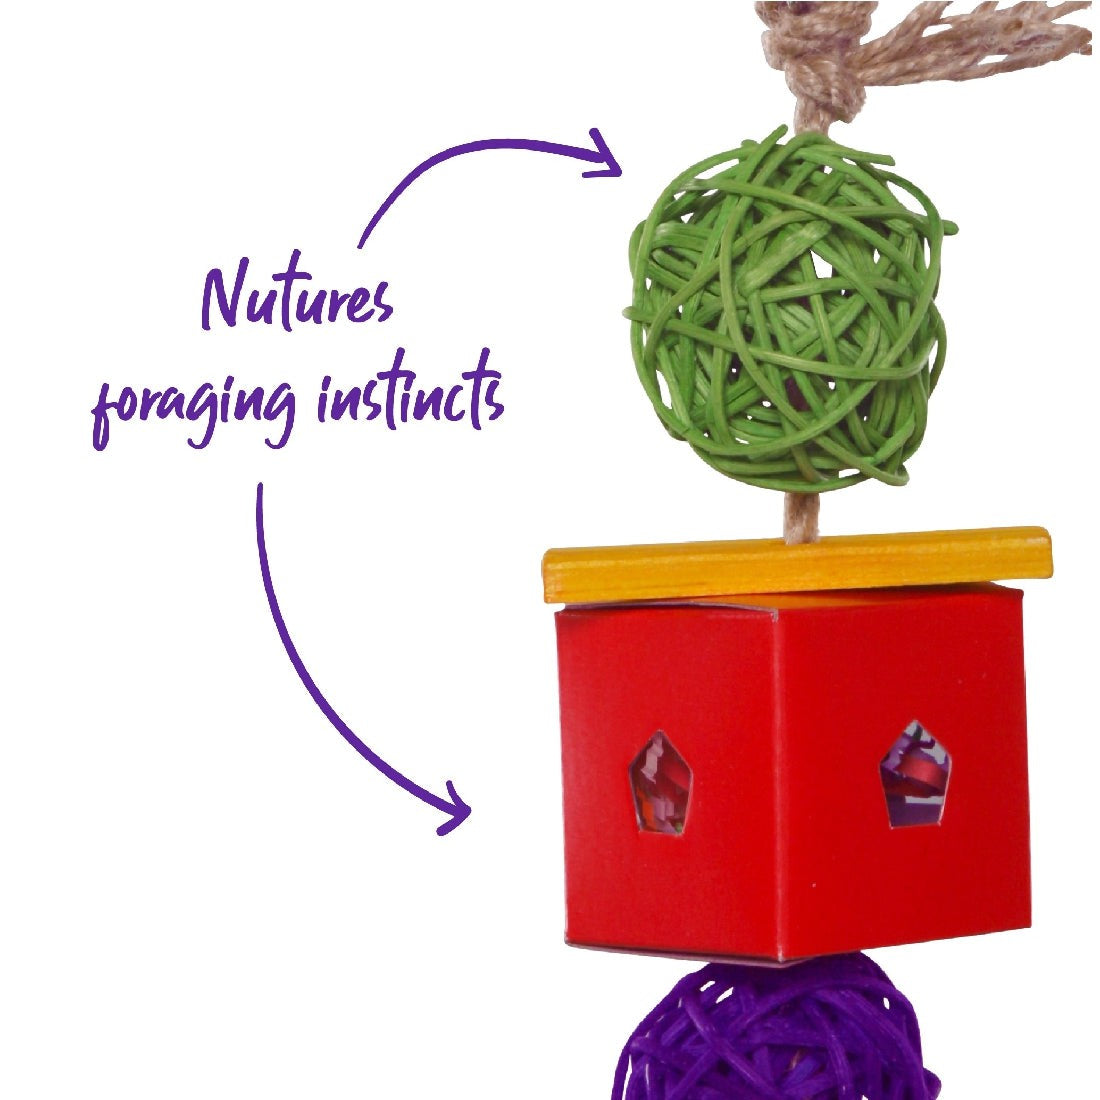 Red and yellow bird toy with green ball enhances foraging instincts.